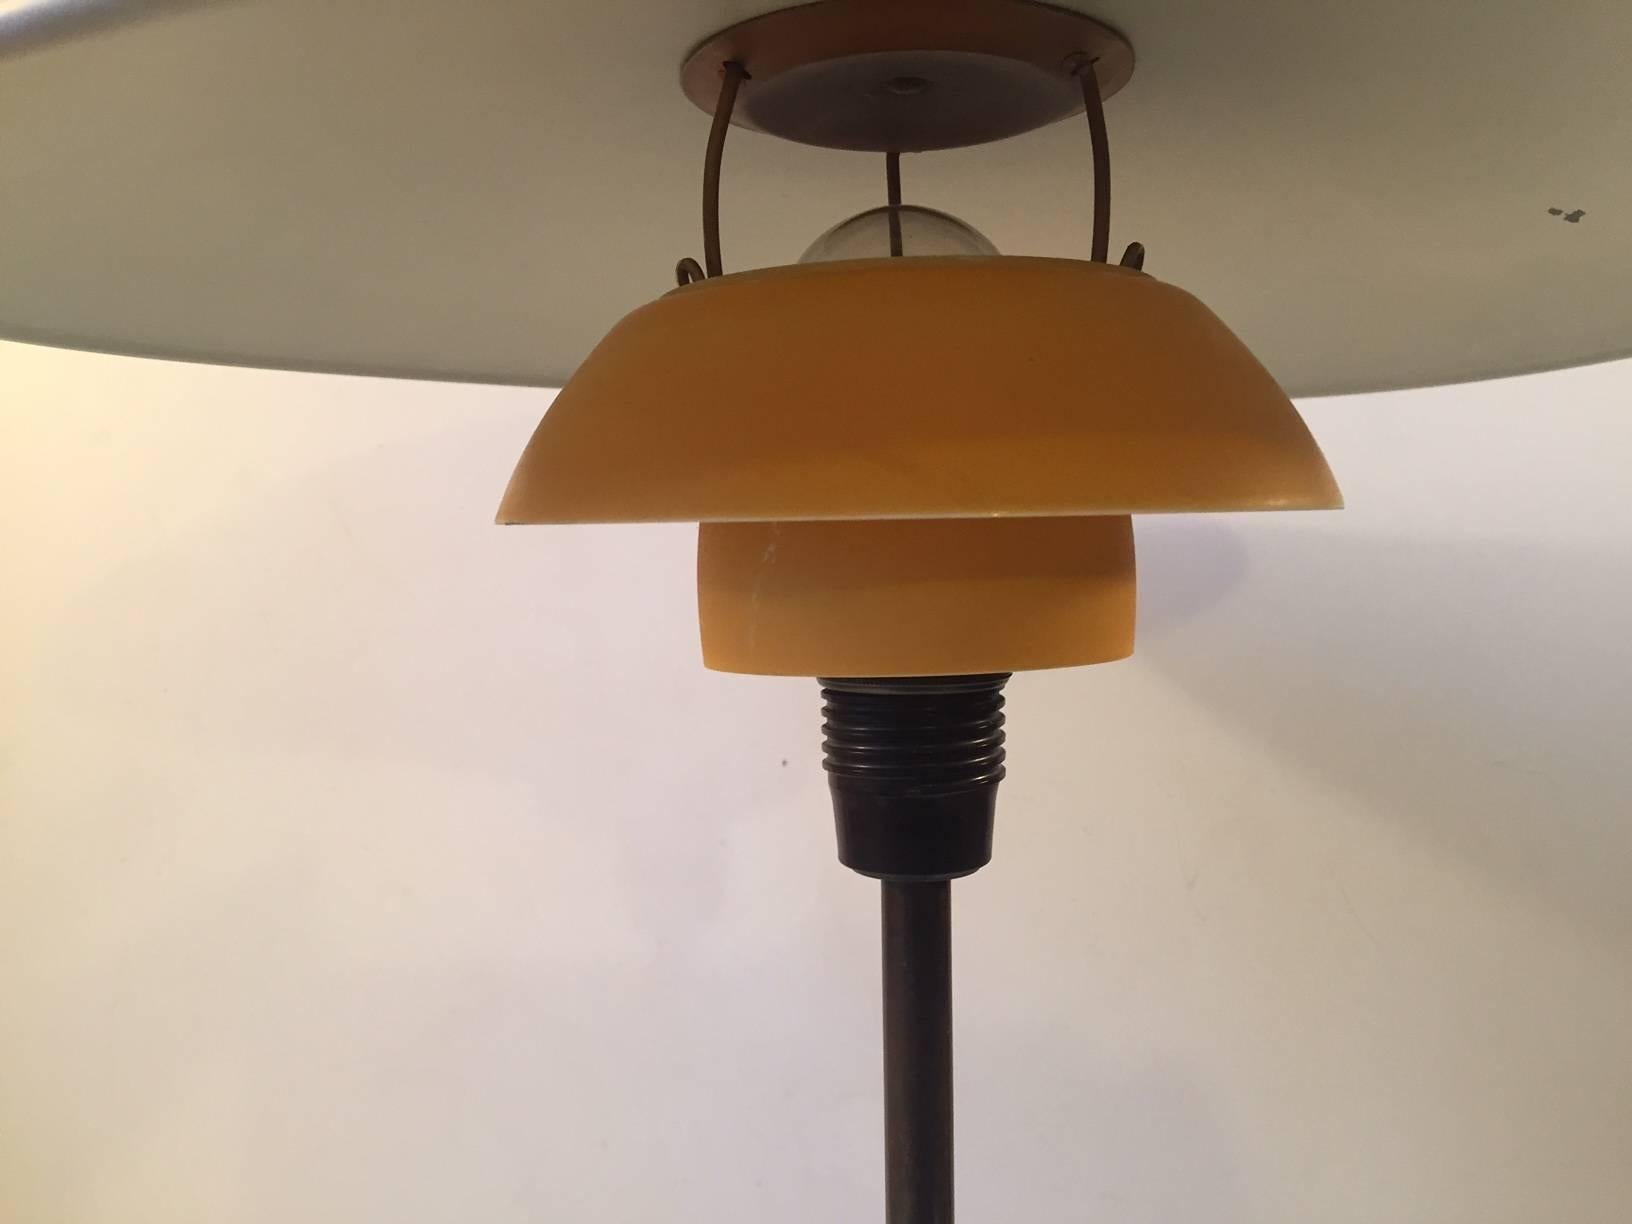 1930s PH 3, 5/2 Table Lamp by Poul Henningsen for Louis Poulsen Denmark In Good Condition For Sale In Esbjerg, DK